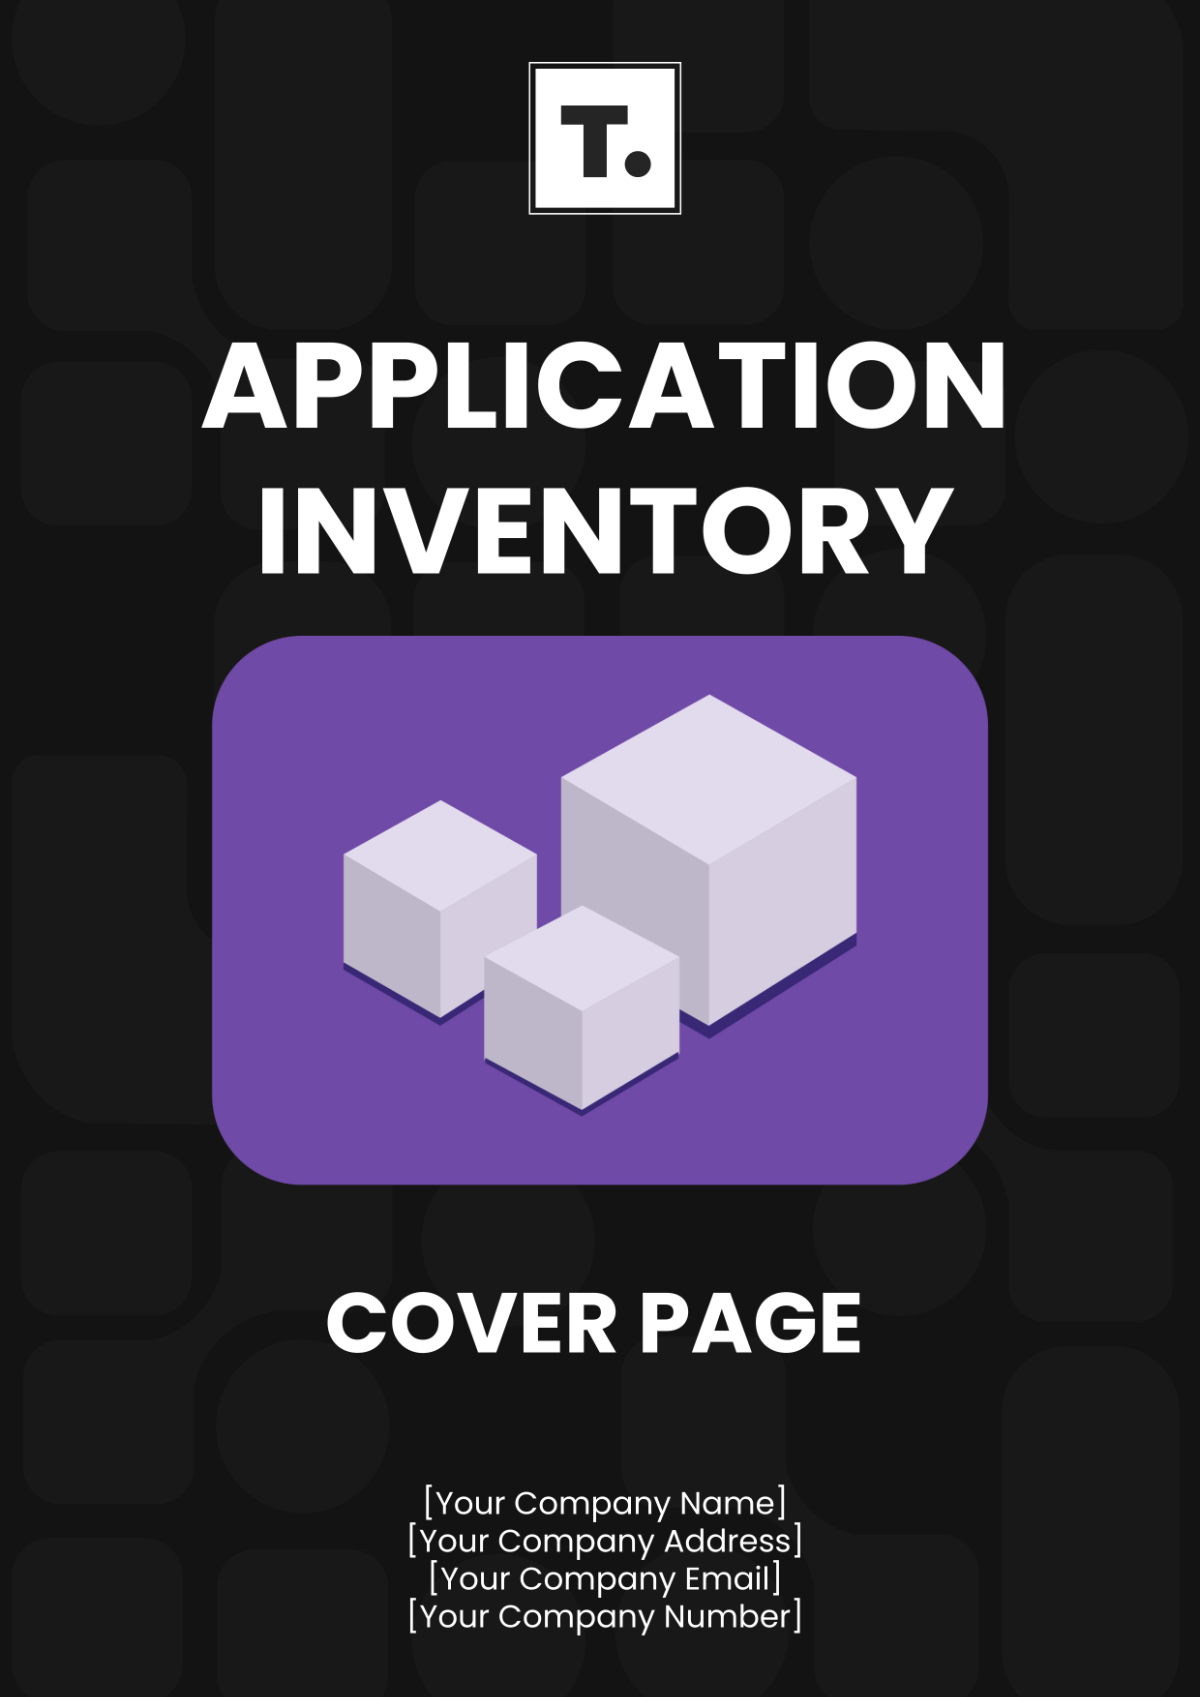 Application Inventory Cover Page